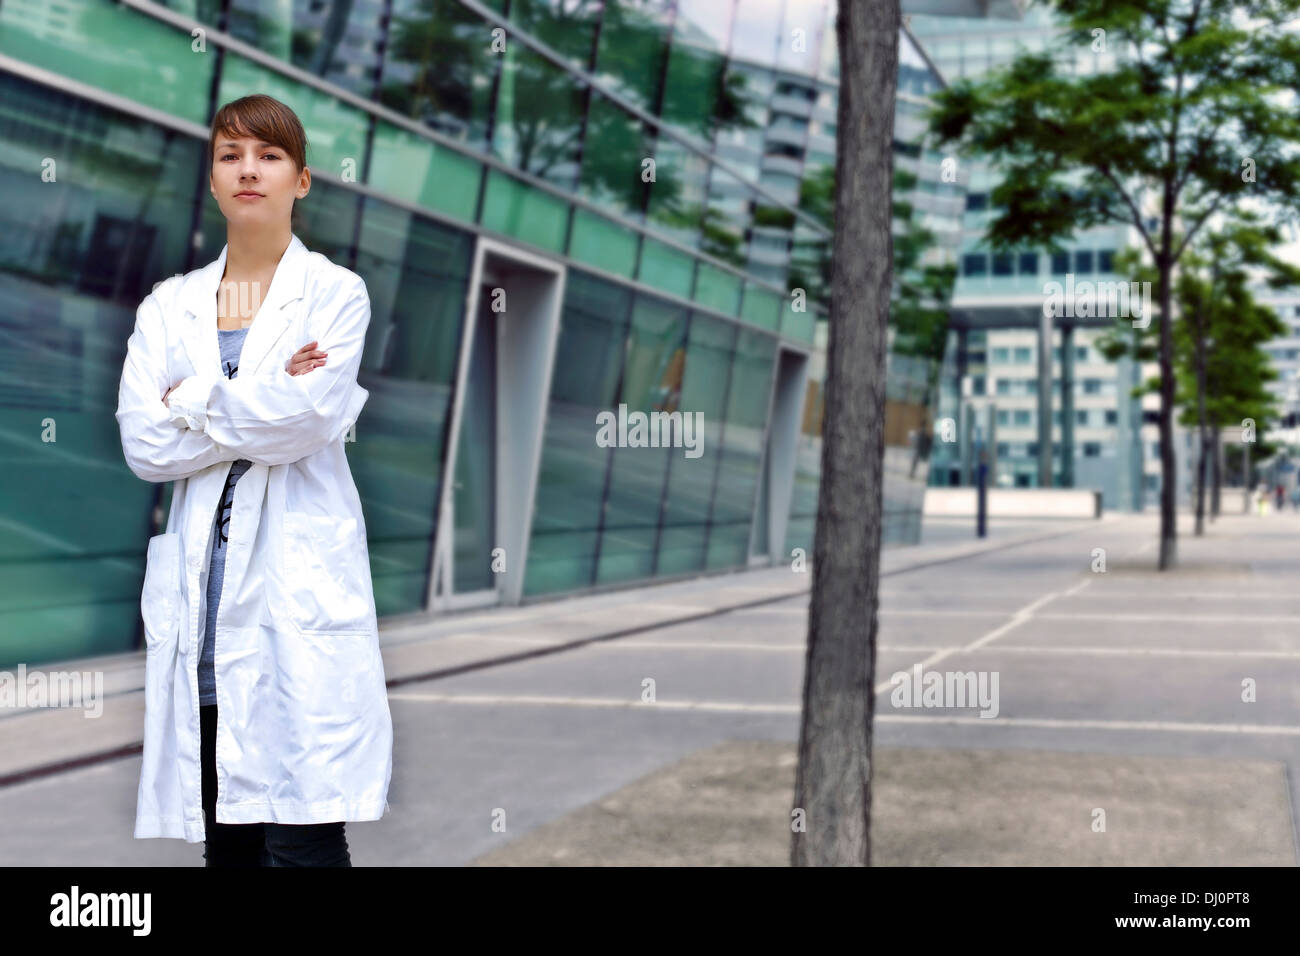 Confident and smart scientist or doctor Stock Photo